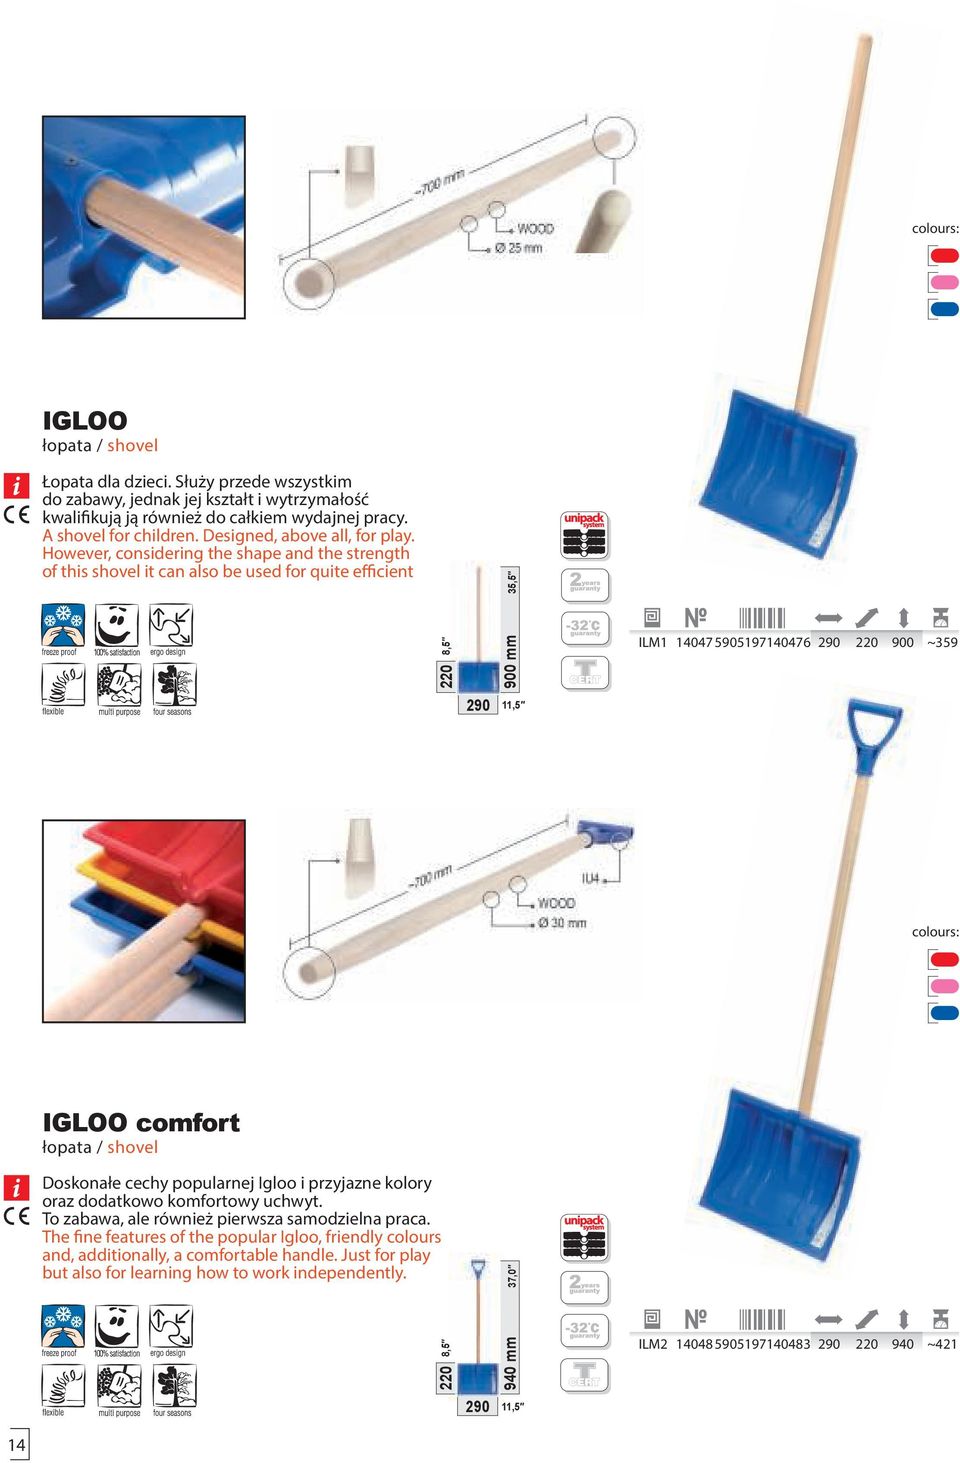 However, considering the shape and the strength of this shovel it can also be used for quite efficient 220 900 mm ILM1 14047 5905197140476 290 220 900 ~359 290 colours: IGLOO comfort łopata /